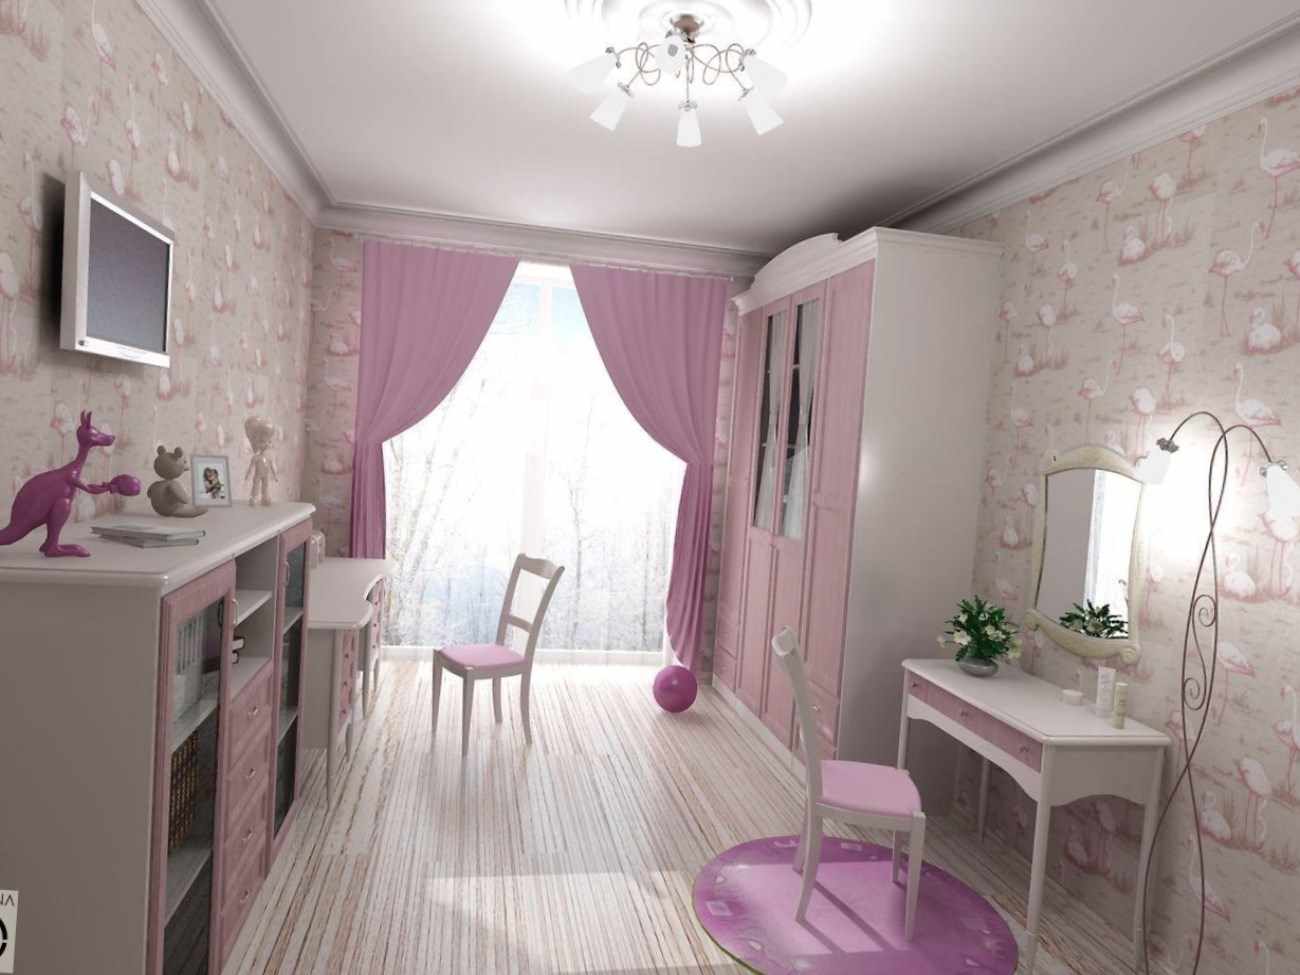 An example of the bright style of a children's room for a girl